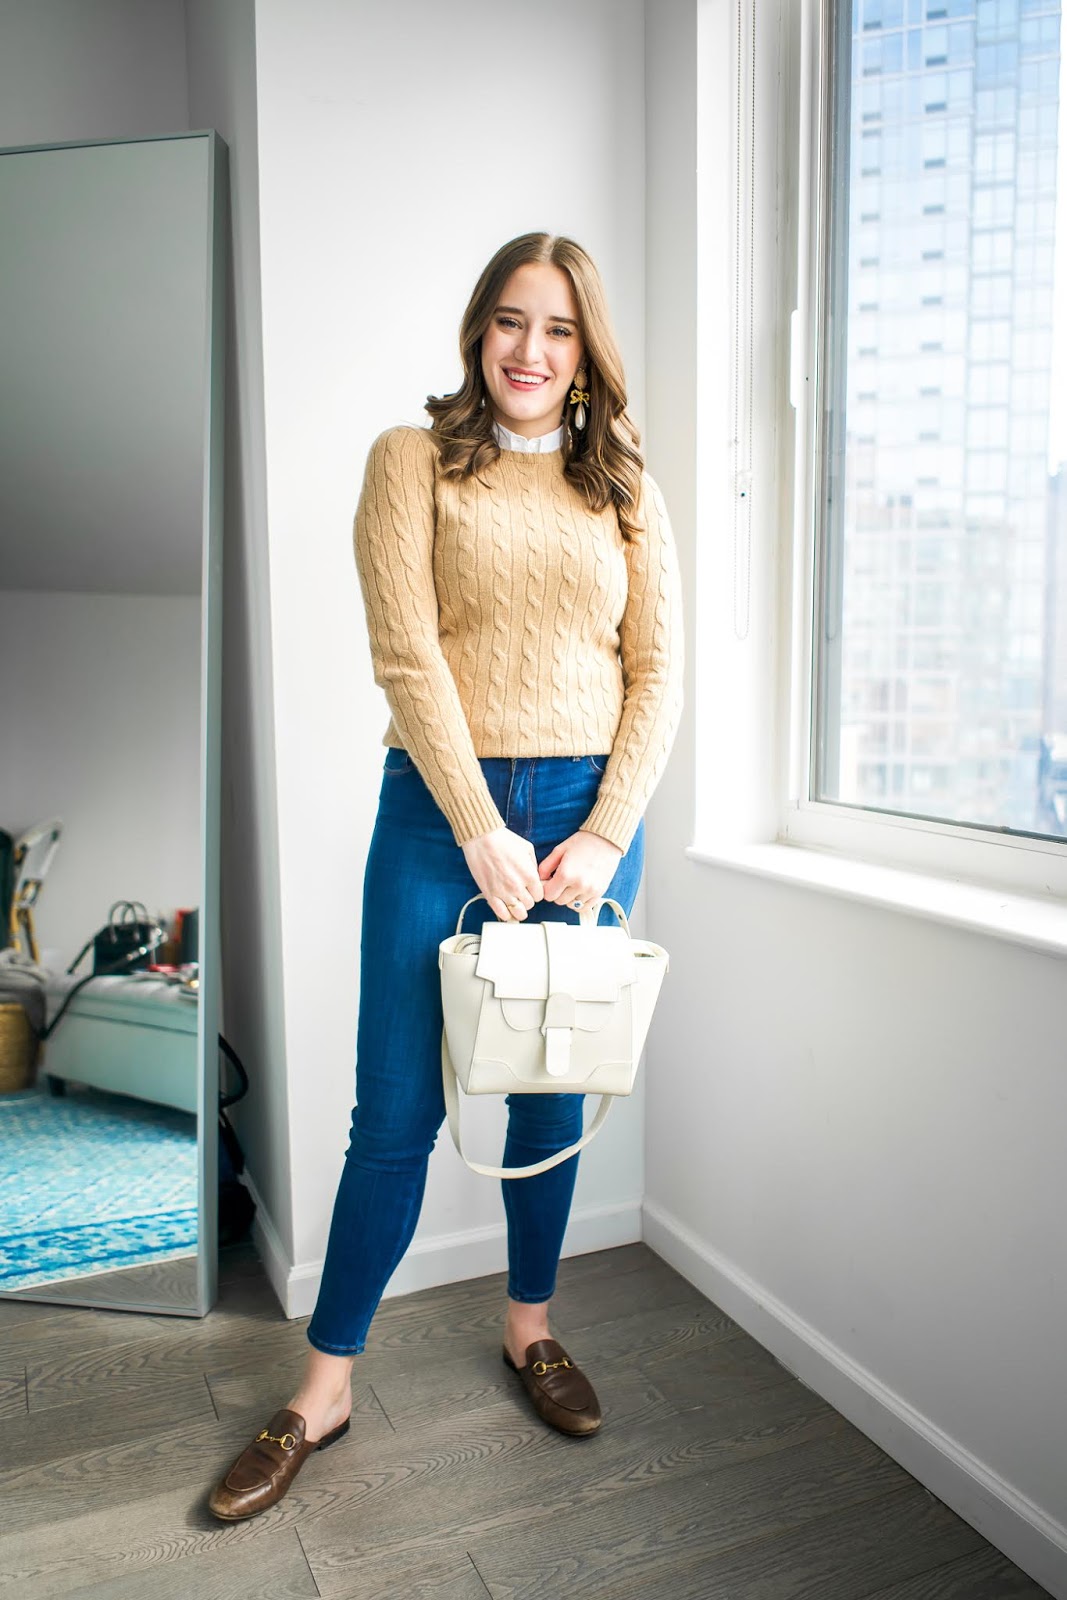 Senreve Maestra Bag Review: Is it Worth it?